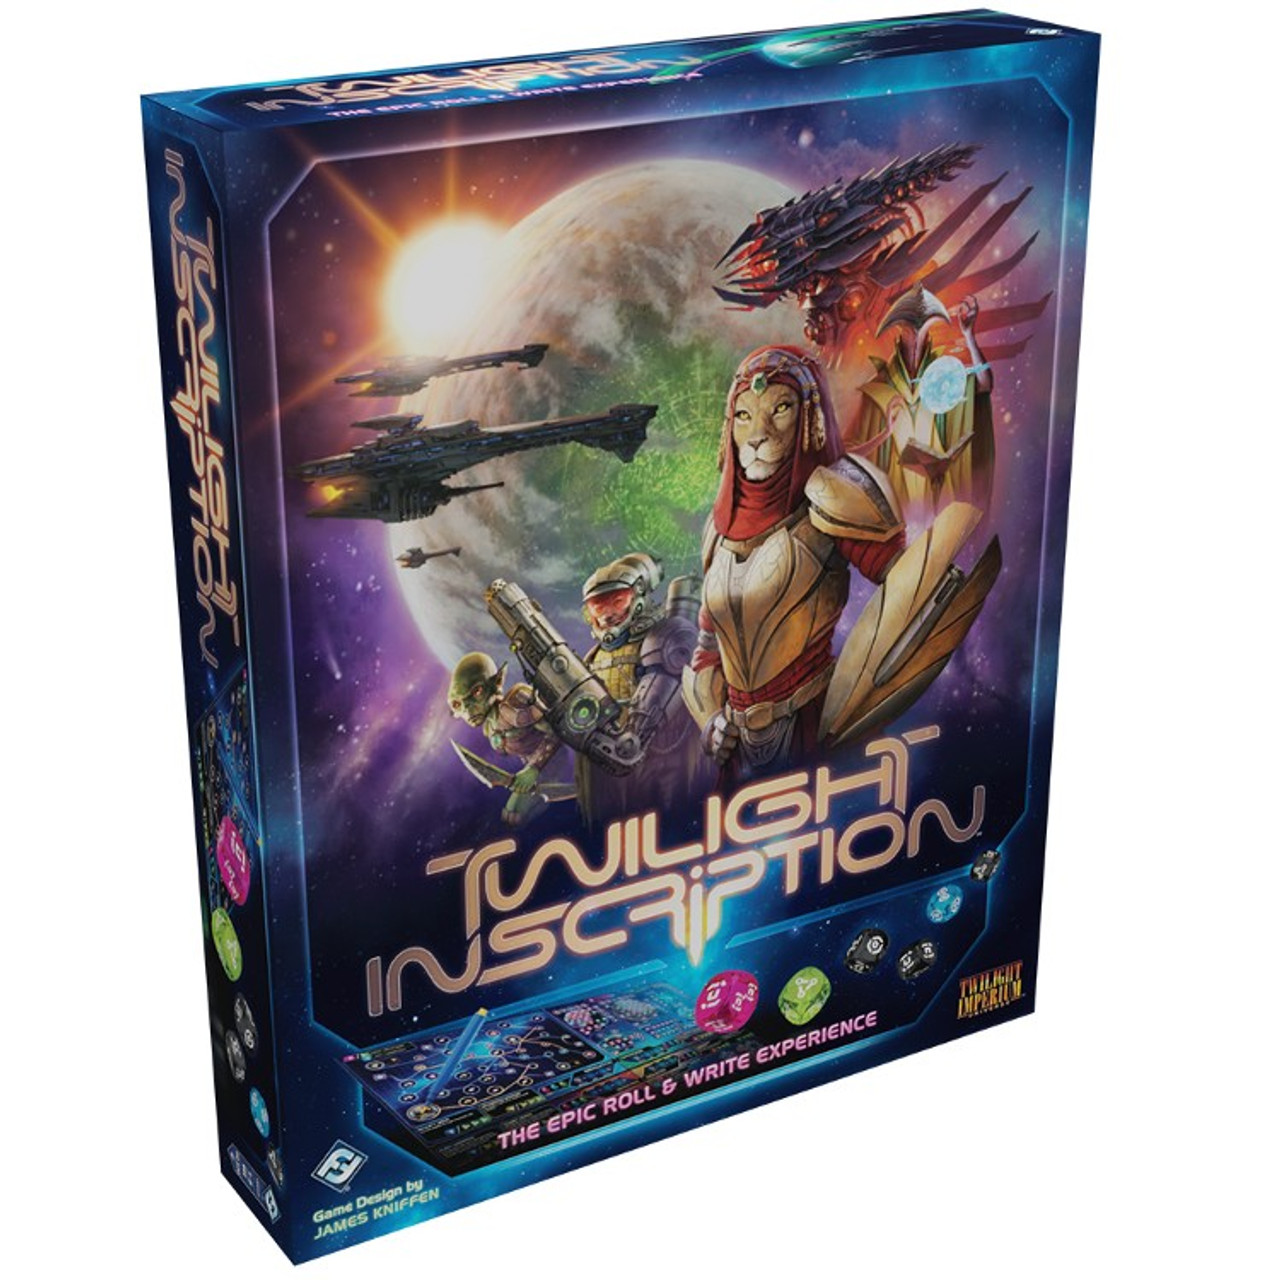 a box for the board game "twilight inscription," featuring a collage fantasy illustration of several characters: an anthropomorphic lioness wearing futuristic battle armor holding a shield, a humanoid inside a militaristic futuristic spacesuit holding a large gun, and a small goblin holding a double sided knife. behind them is a planet in space with a sun behind it. above the planet are intimidating angular long spaceships